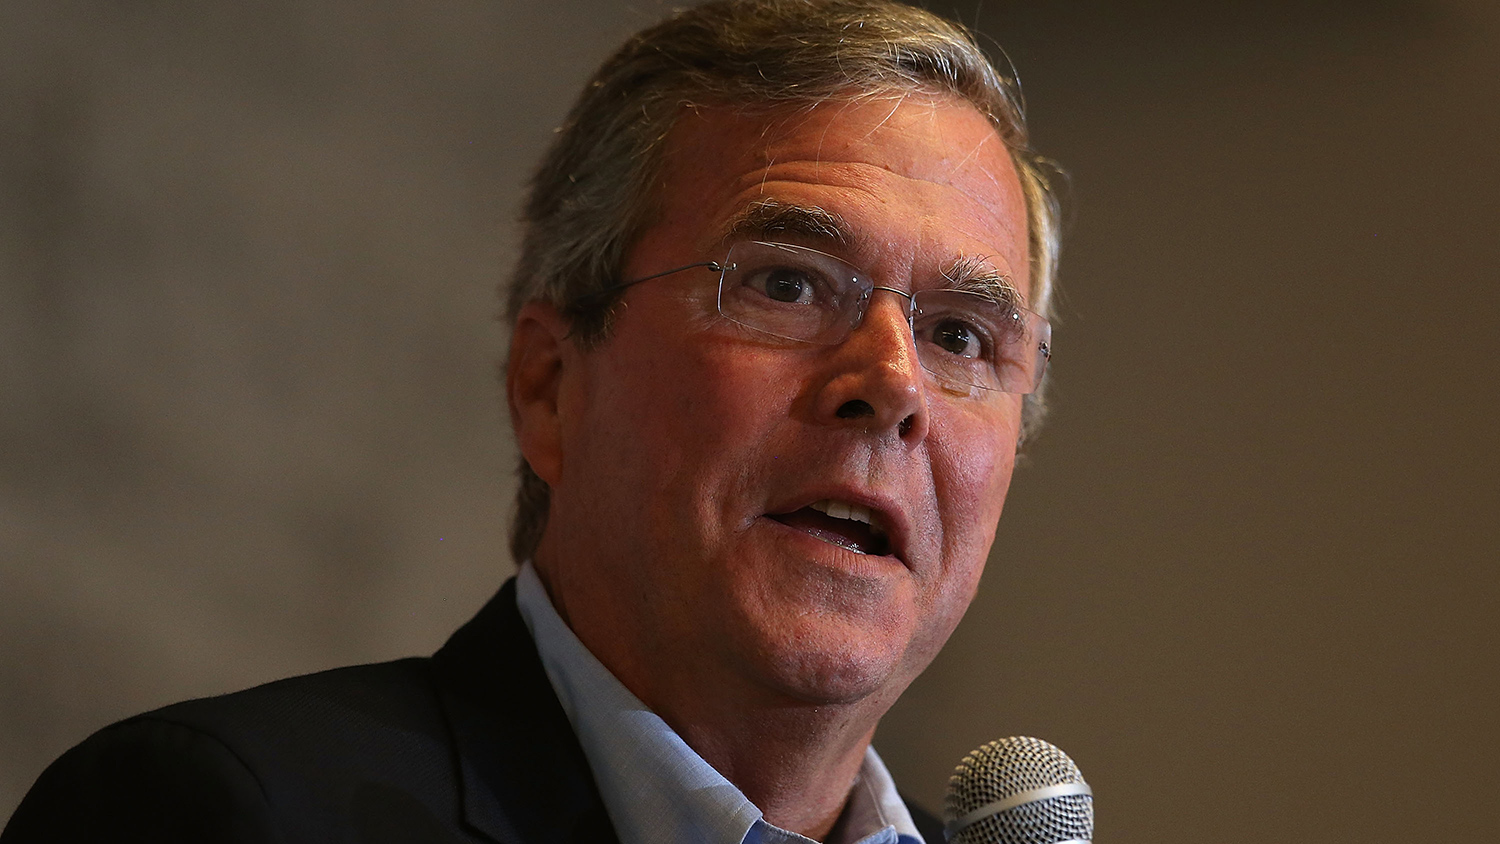 Republican presidential candidate and former Florida governor Jeb Bush speaks to workers at Thumbtack on July 16, 2015 in San Francisco, California.
